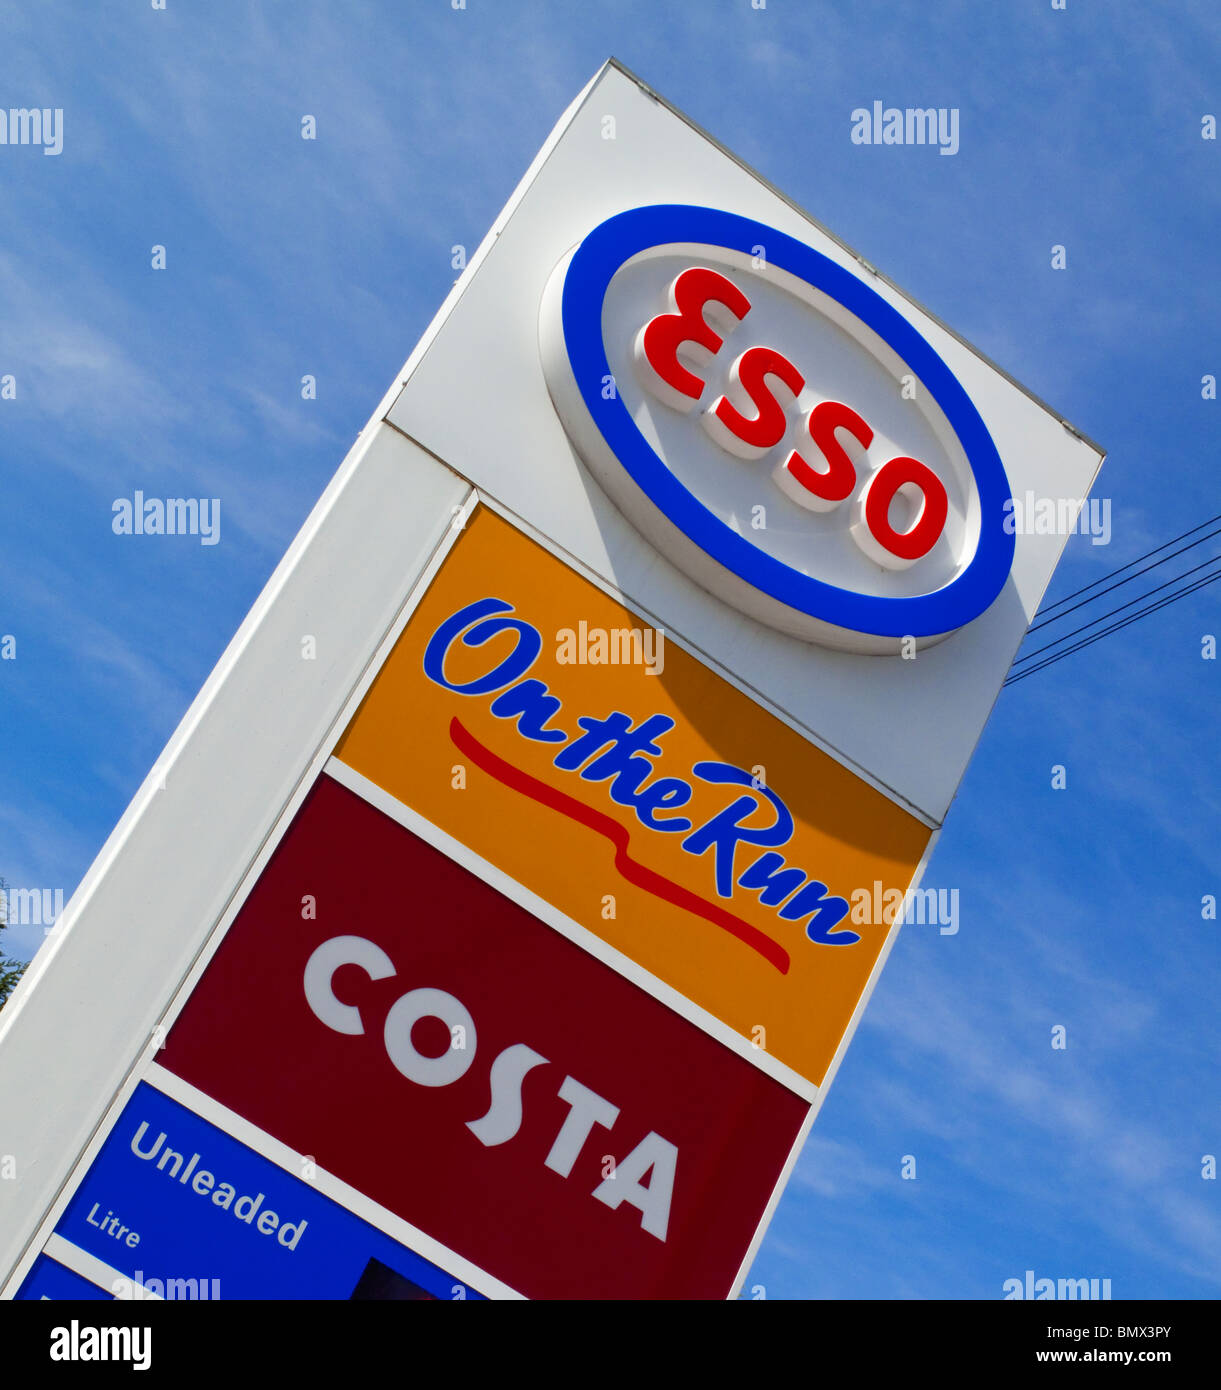 Esso logo outside petrol forecourt and Costa Coffee logo below Stock Photo